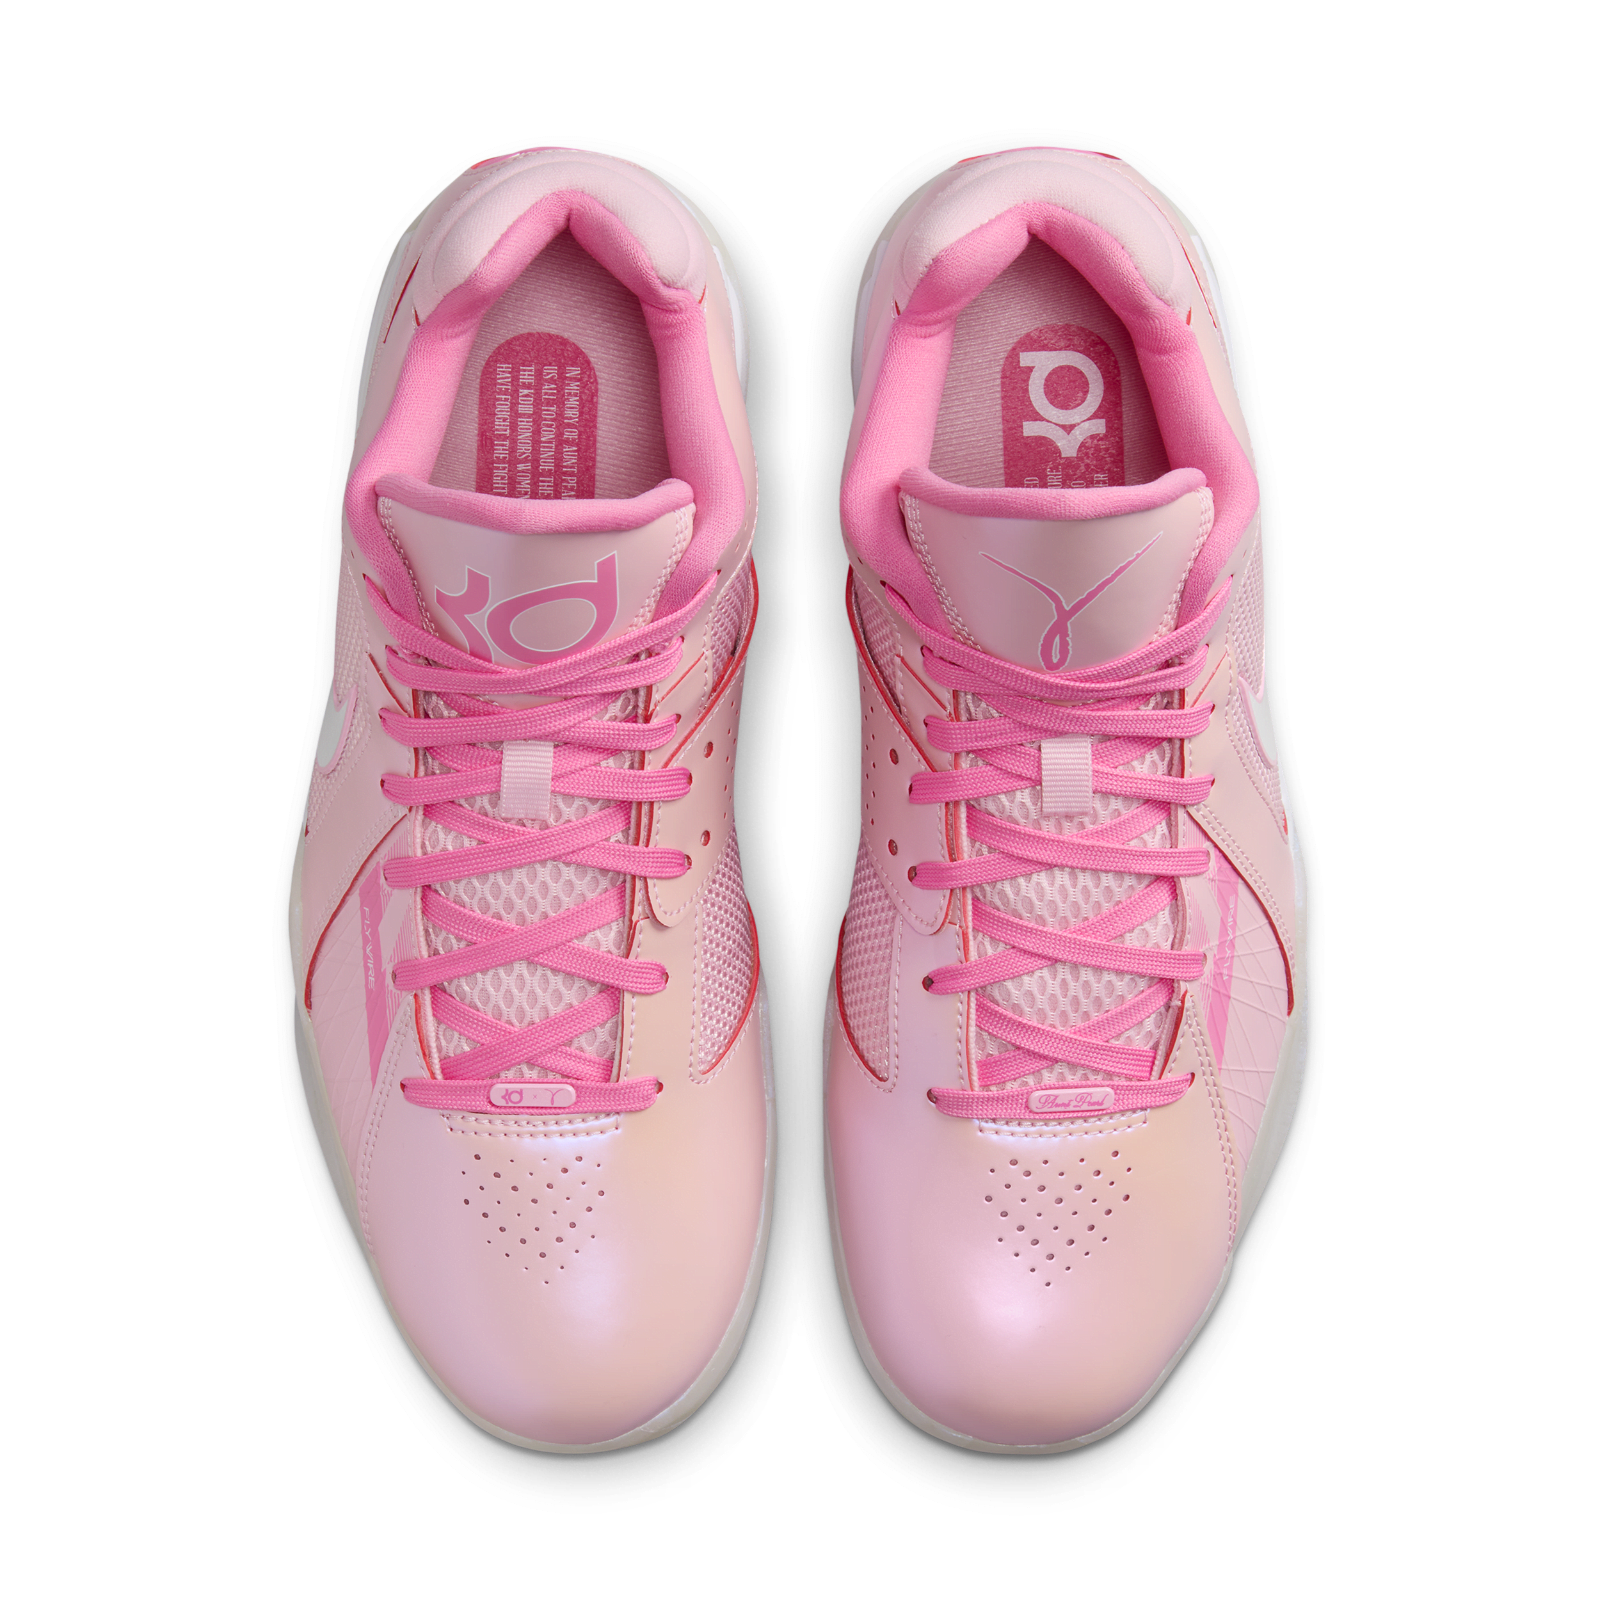 KD 3 "Aunt Pearl"